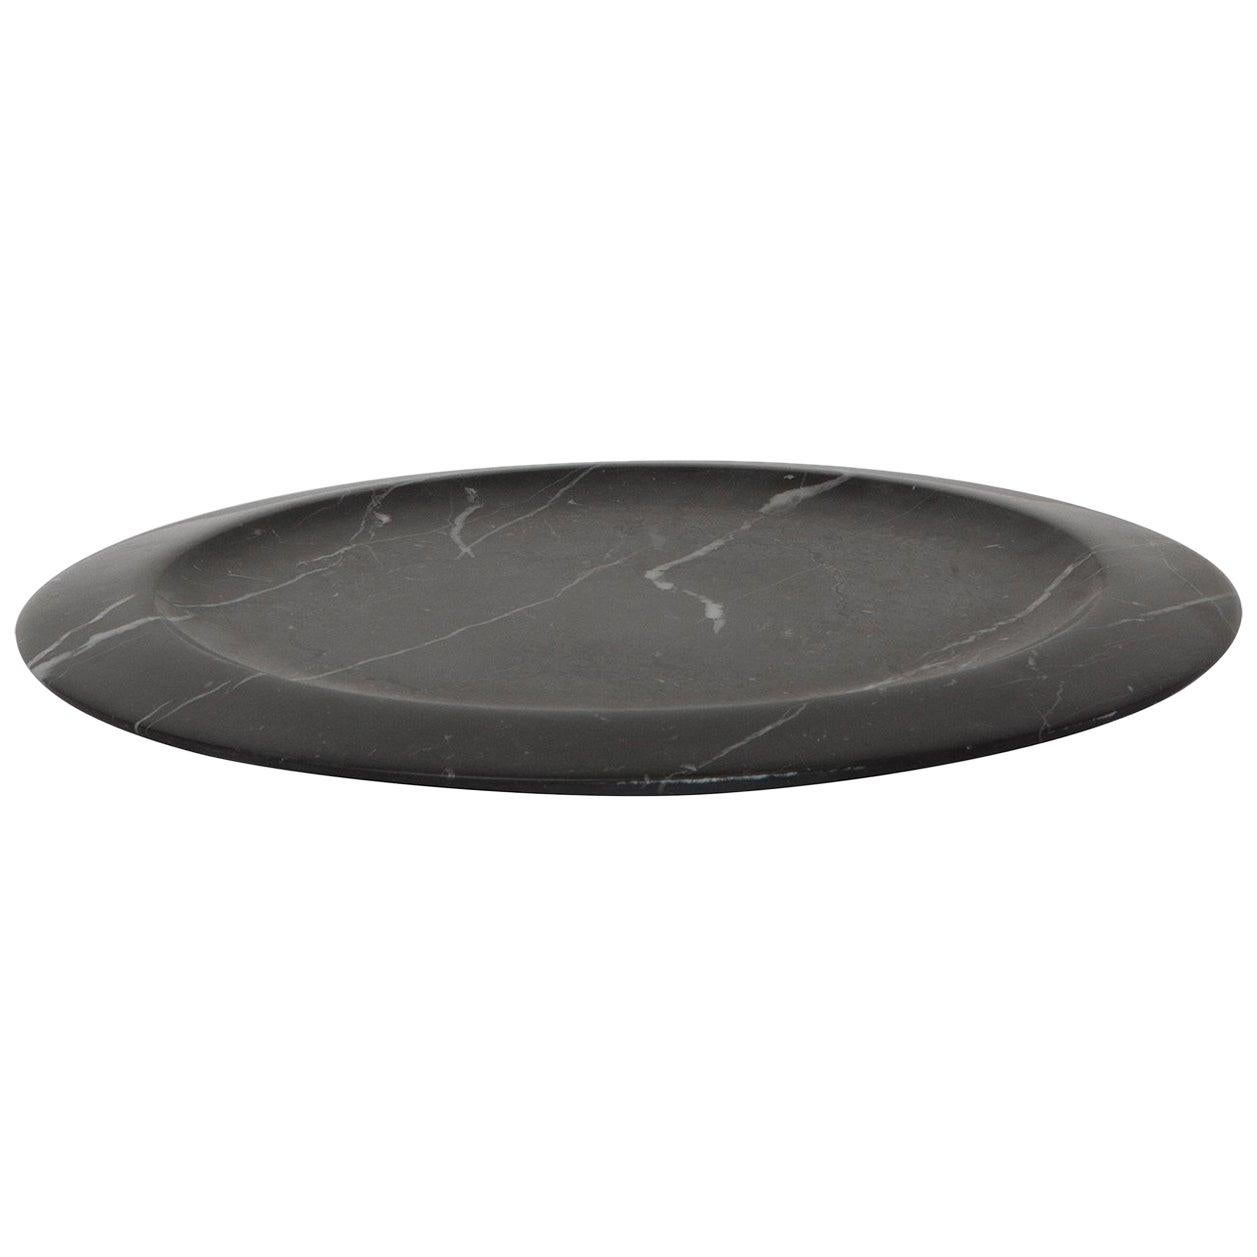 Dish in Black Marquinia Marble by Ivan Colominas, Italy, Stock